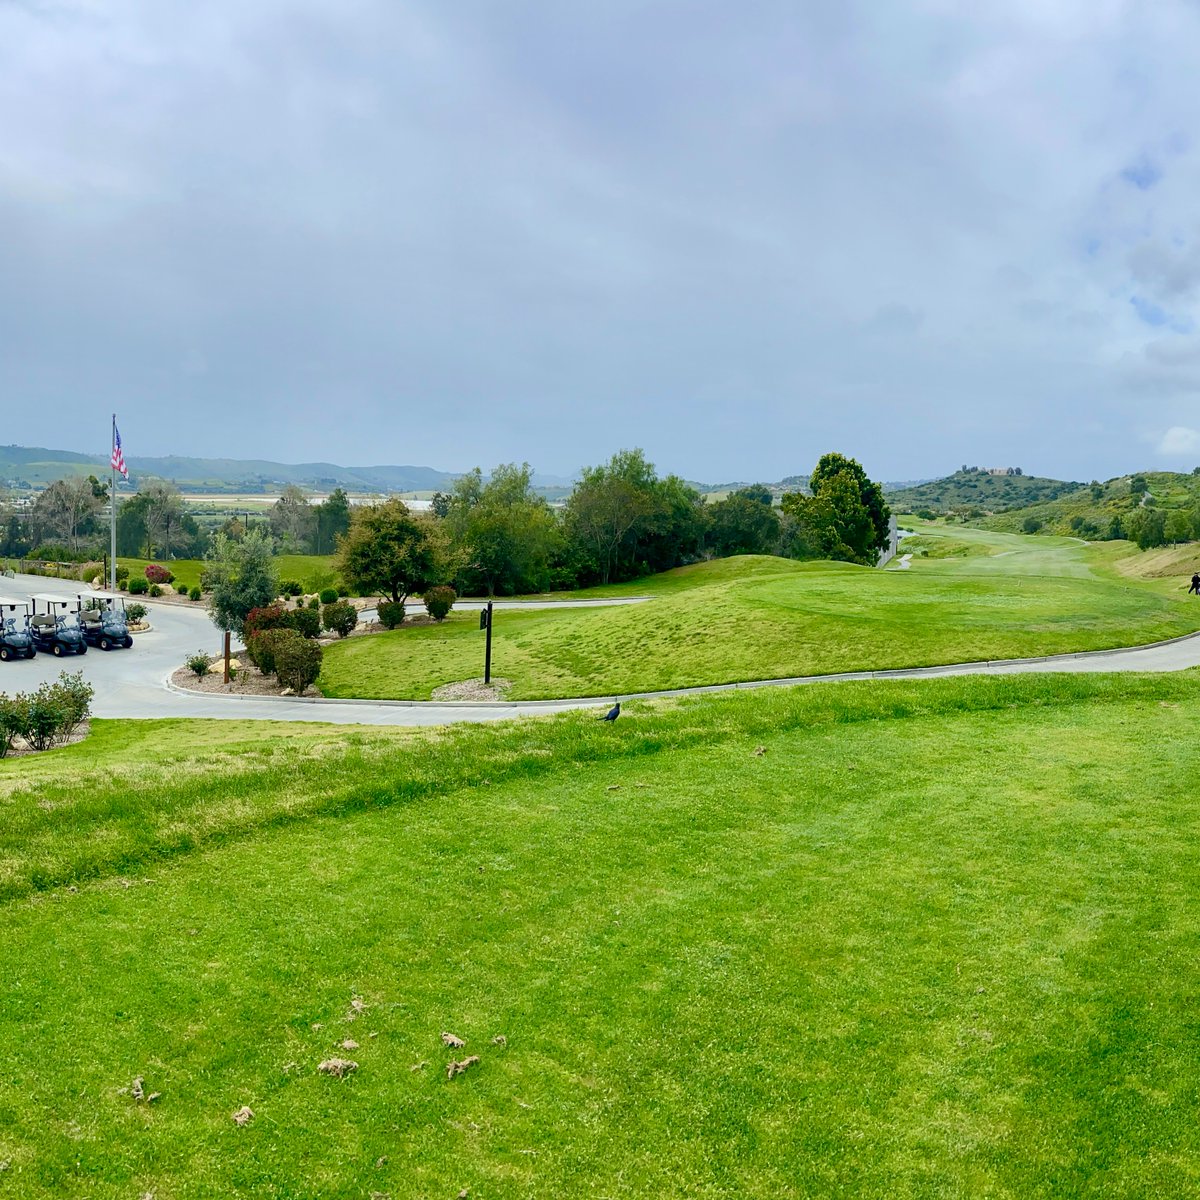 It's been a while since we've posted a Pano.... 

#panophoto #golfcourse #golfclub #proshop #golfclubhouse #panoramic